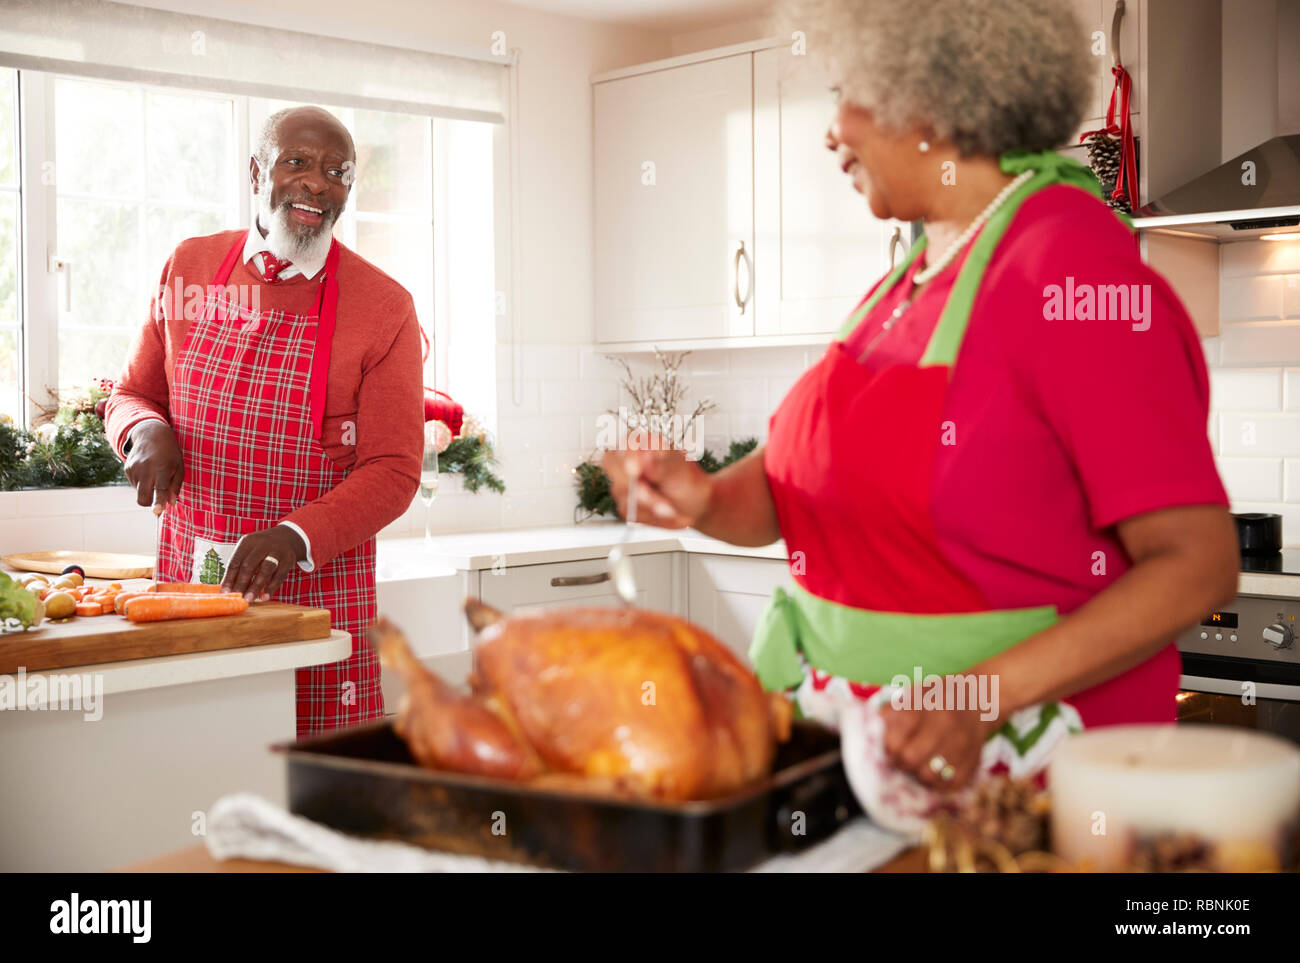 https://c8.alamy.com/comp/RBNK0E/senior-black-woman-preparing-a-roast-turkey-for-christmas-dinner-turns-to-talk-to-her-husband-chopping-vegetables-in-the-background-close-up-RBNK0E.jpg